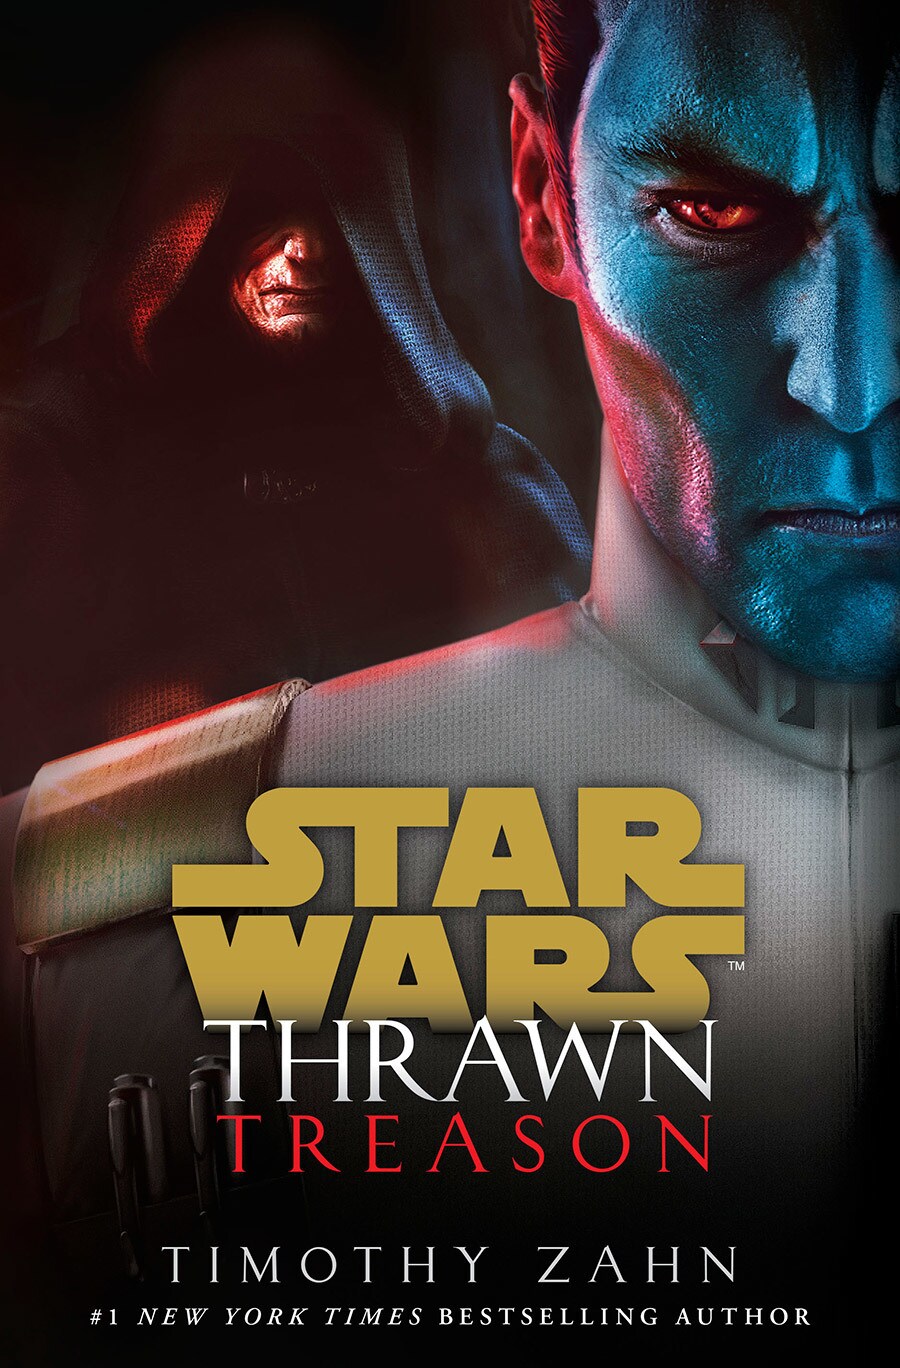 The cover of the novel Thrawn: Treason, by Timothy Zahn, shows Thrawn in the foreground with Emperor Palpatine looming behind him.